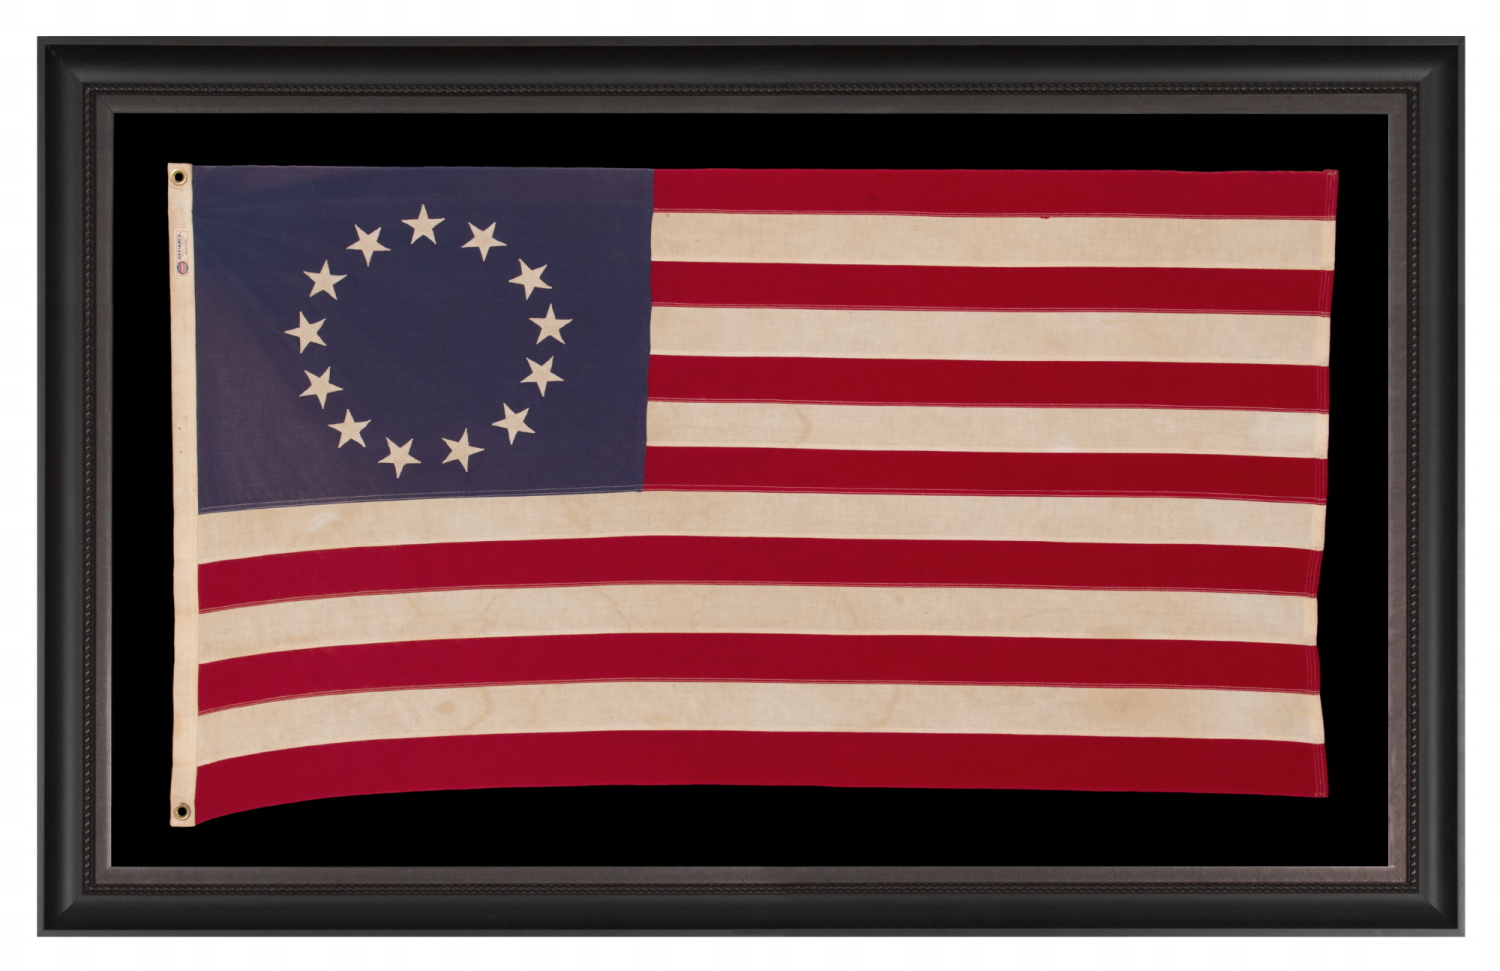 13 STARS IN THE BETSY ROSS PATTERN, ON A VINTAGE AMERICAN FLAG, MADE BY THE ANNIN COMPANY OF NEW YORK & NEW JERSEY, circa 1955 - 1965